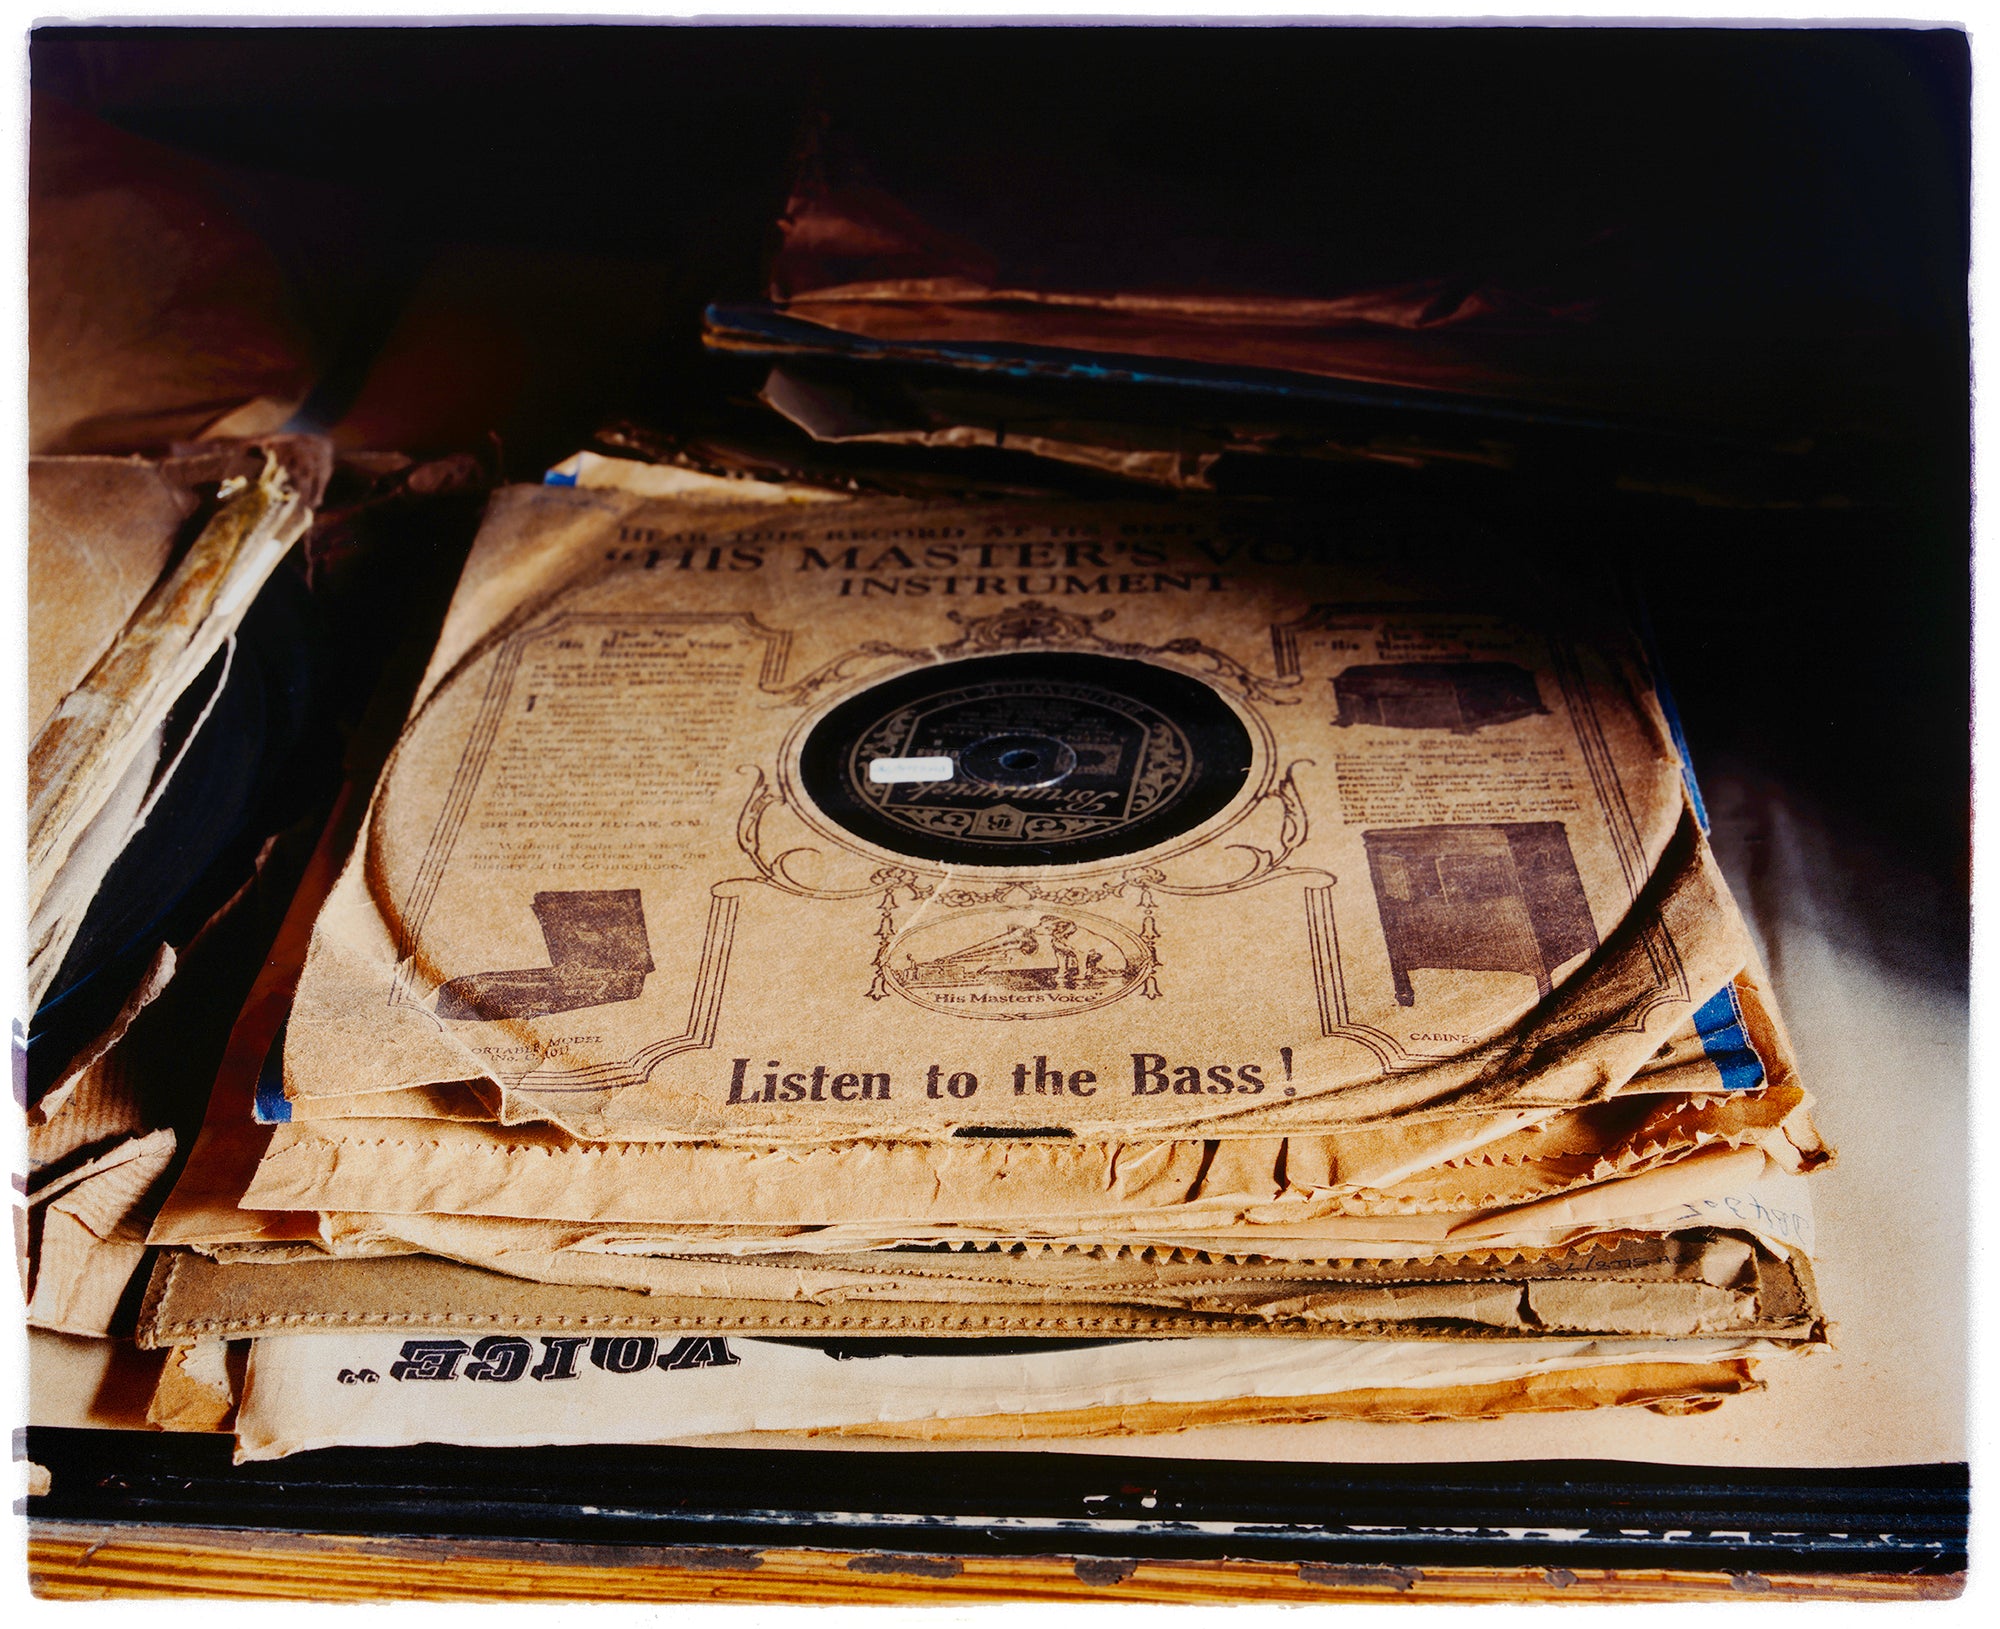 A vintage vinyl record collection in a pile, on the top is His Masters Voice, Listen to the Bass, photograph by Richard Heeps.